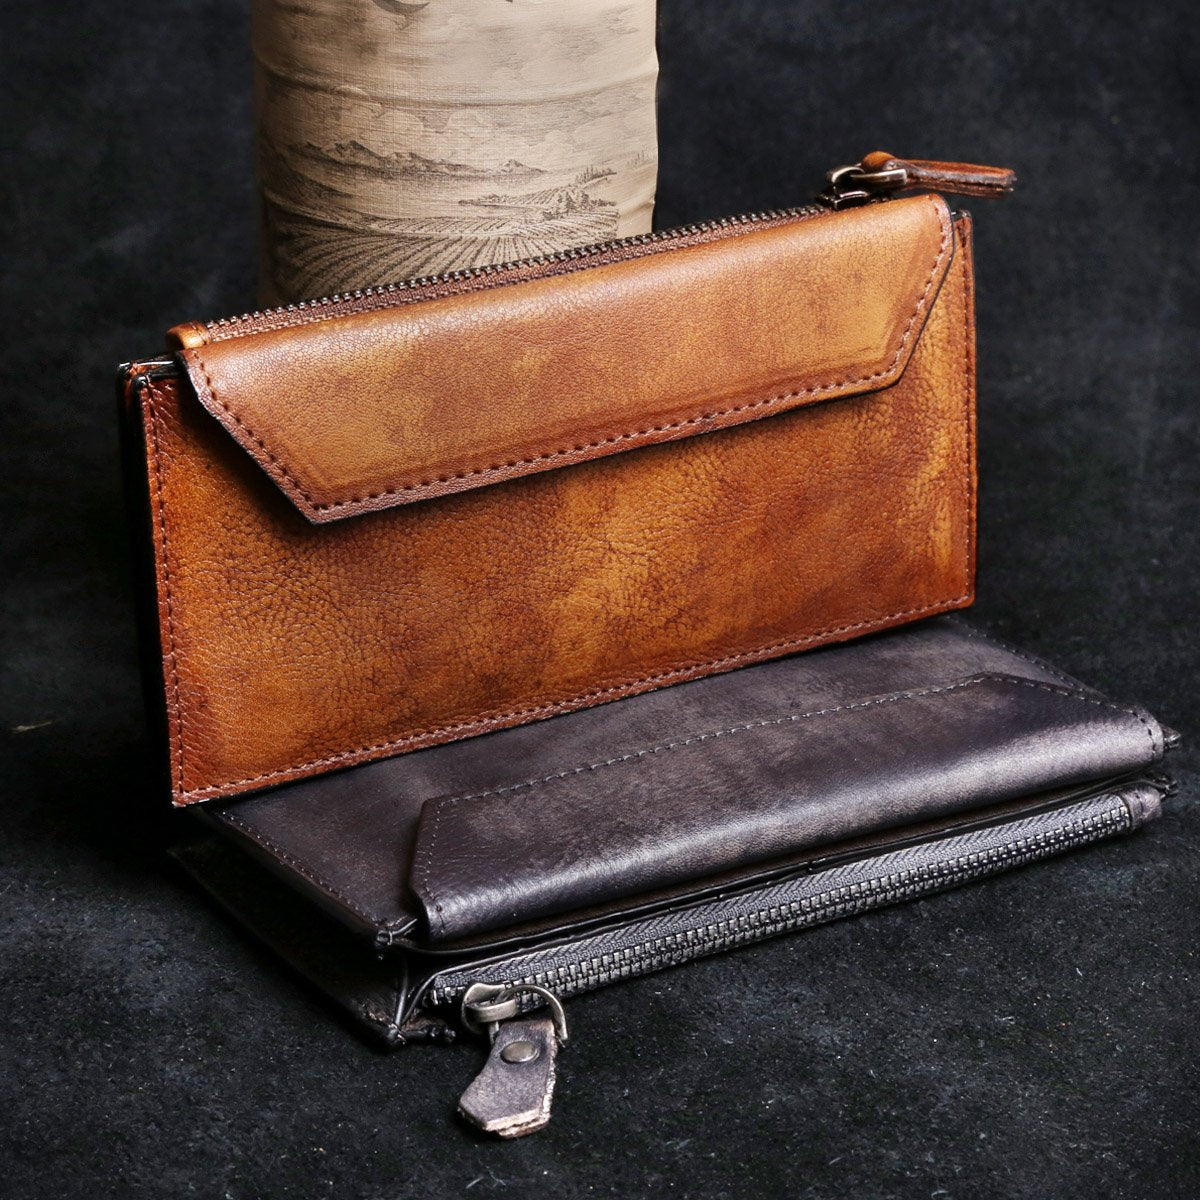 Genuine Leather Mens Cool Long Leather Wallet Card Wallet Clutch Wrist ...